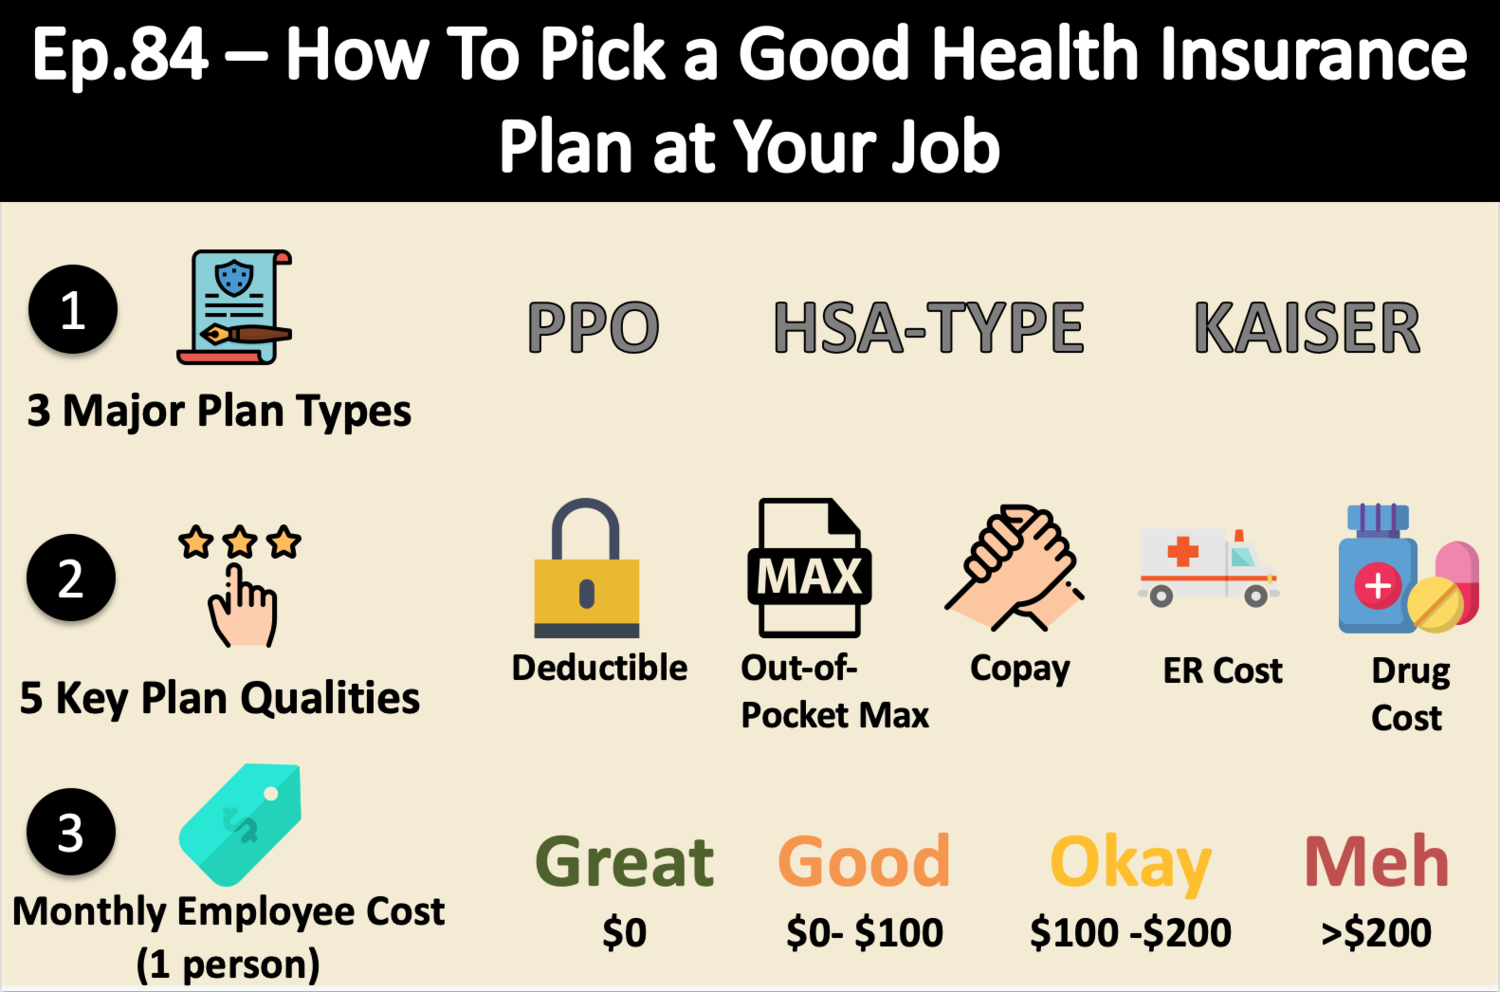 How do I choose the right health insurance plan for me?